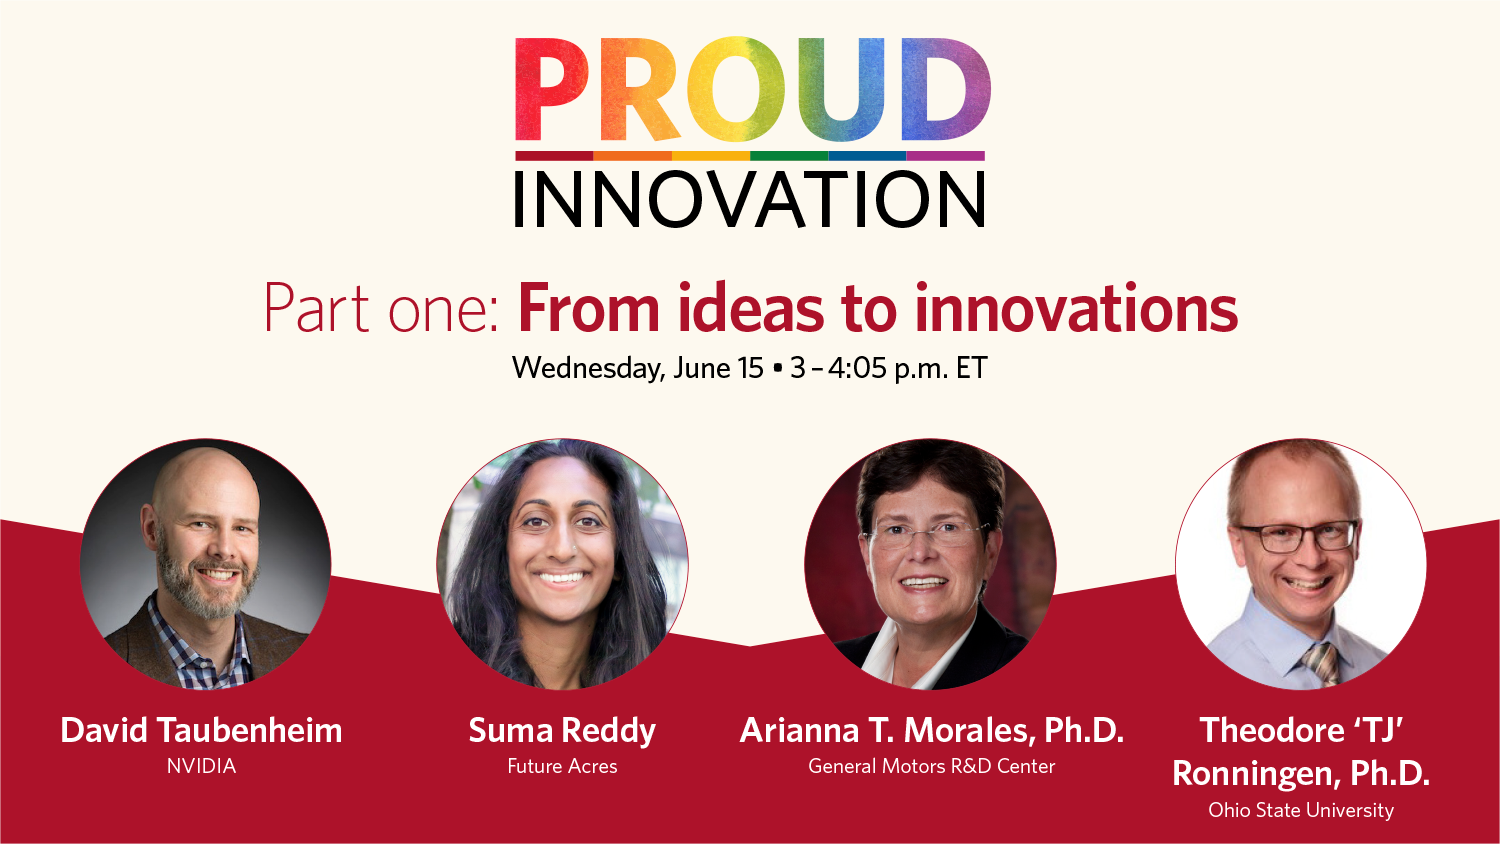 Proud innovation part one -- from ideas to innovations